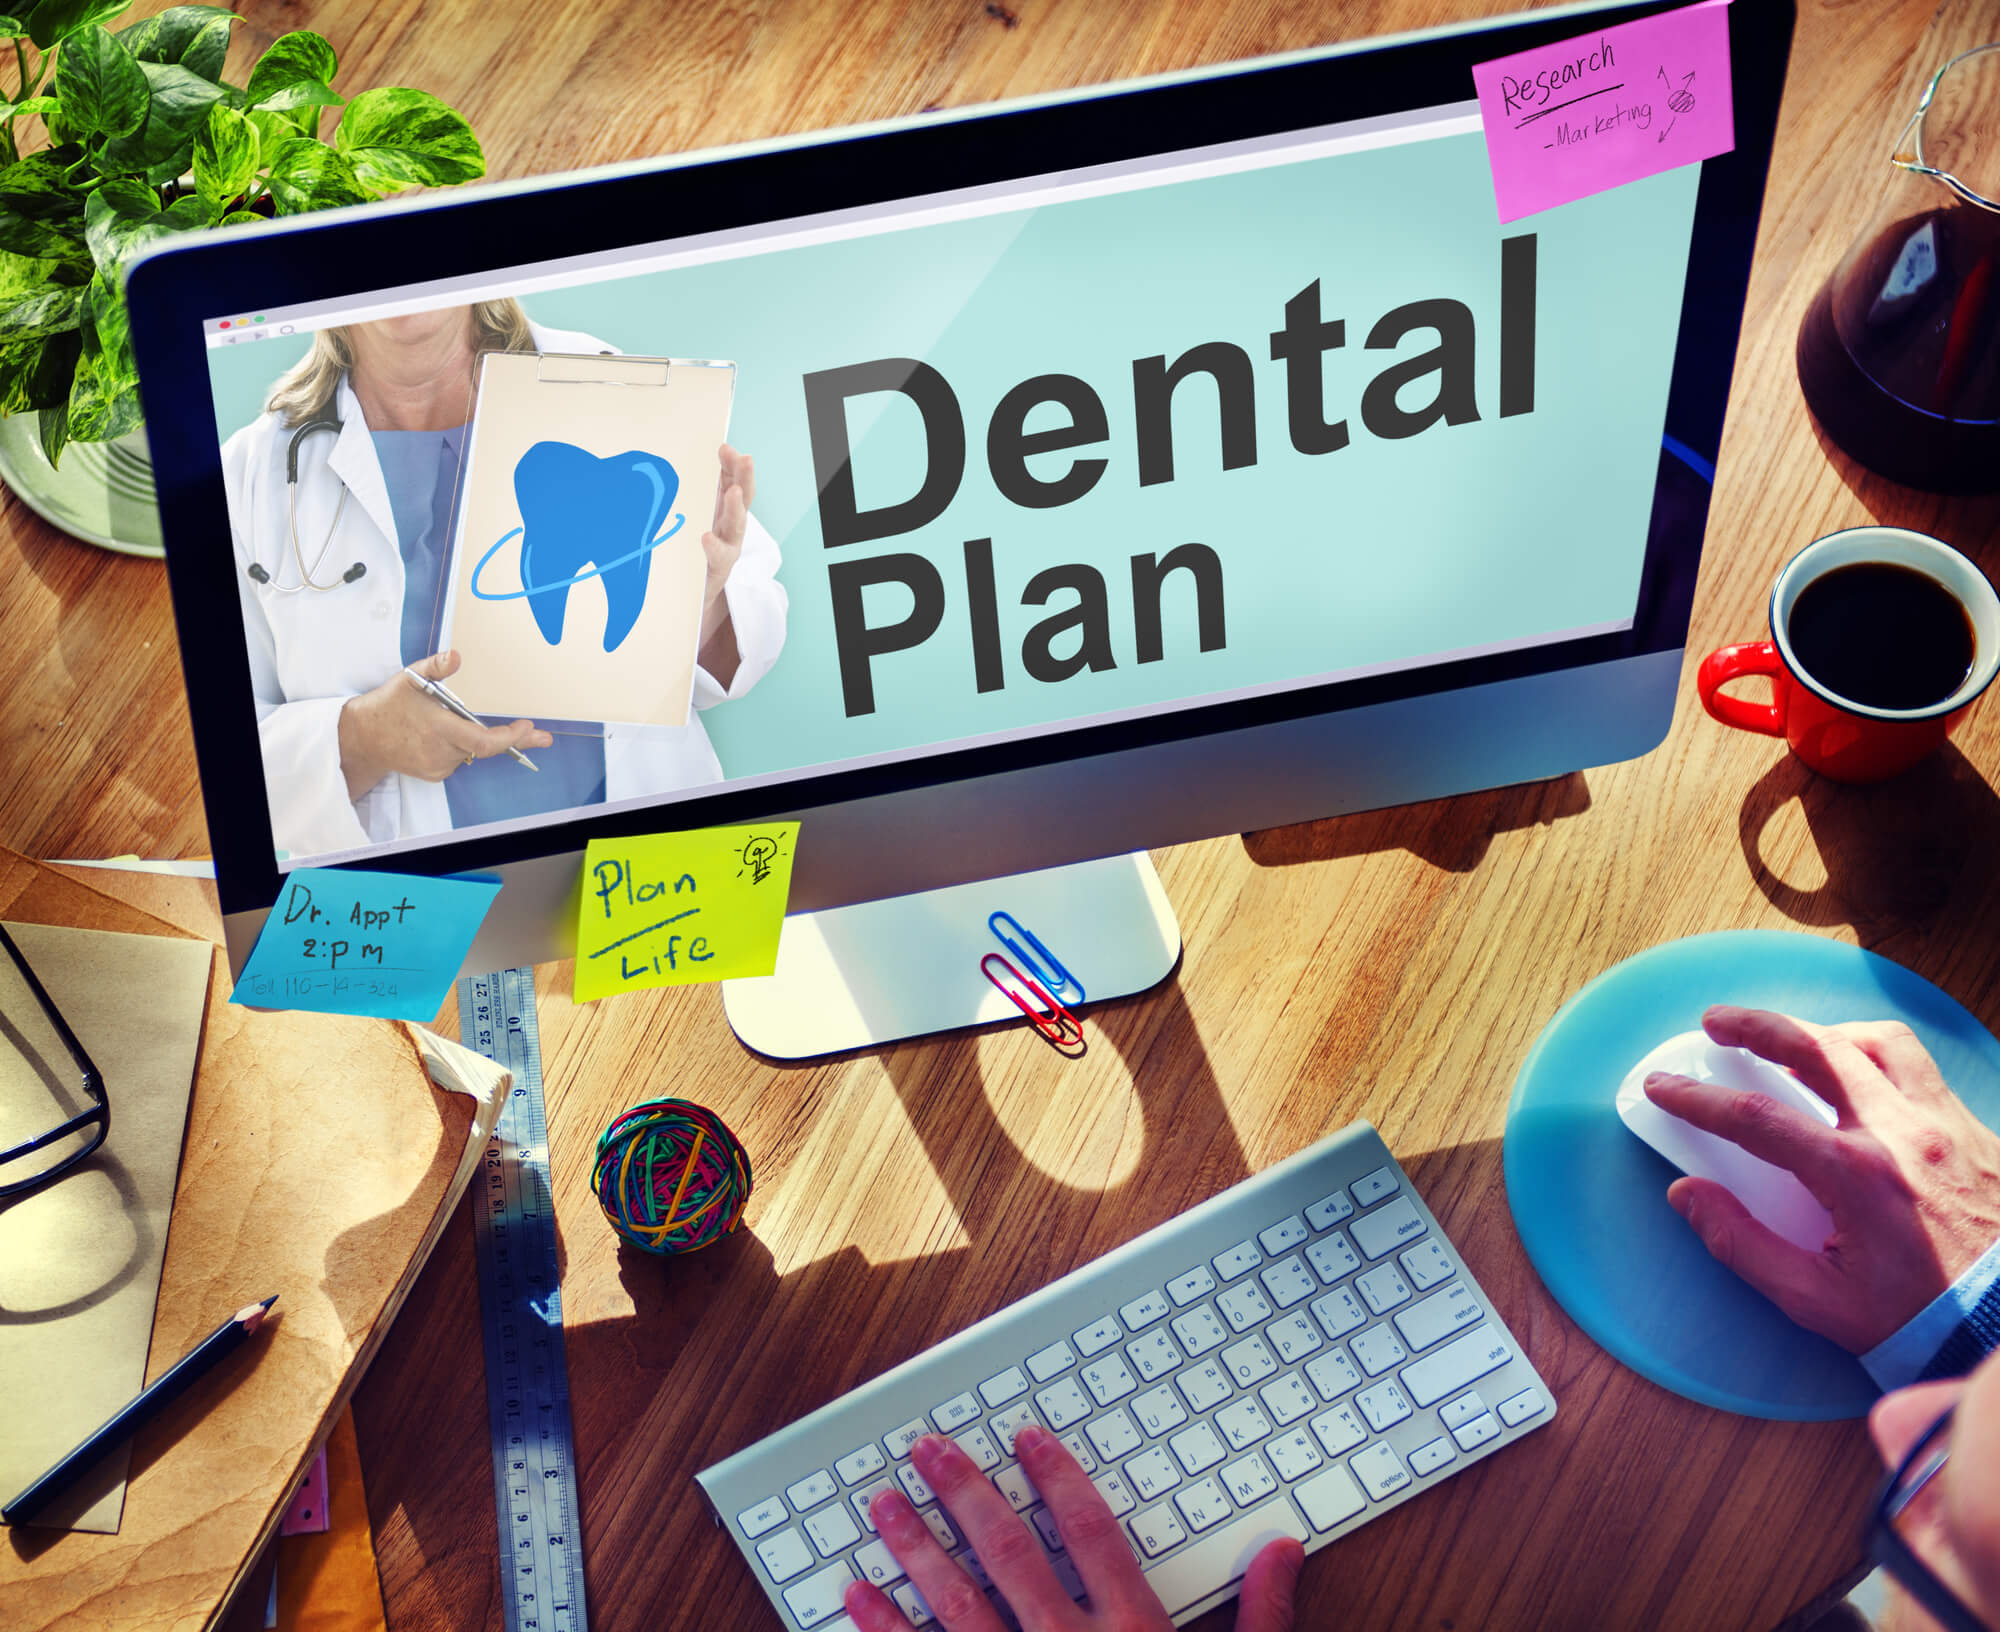 Great Dental Websites Have in Common